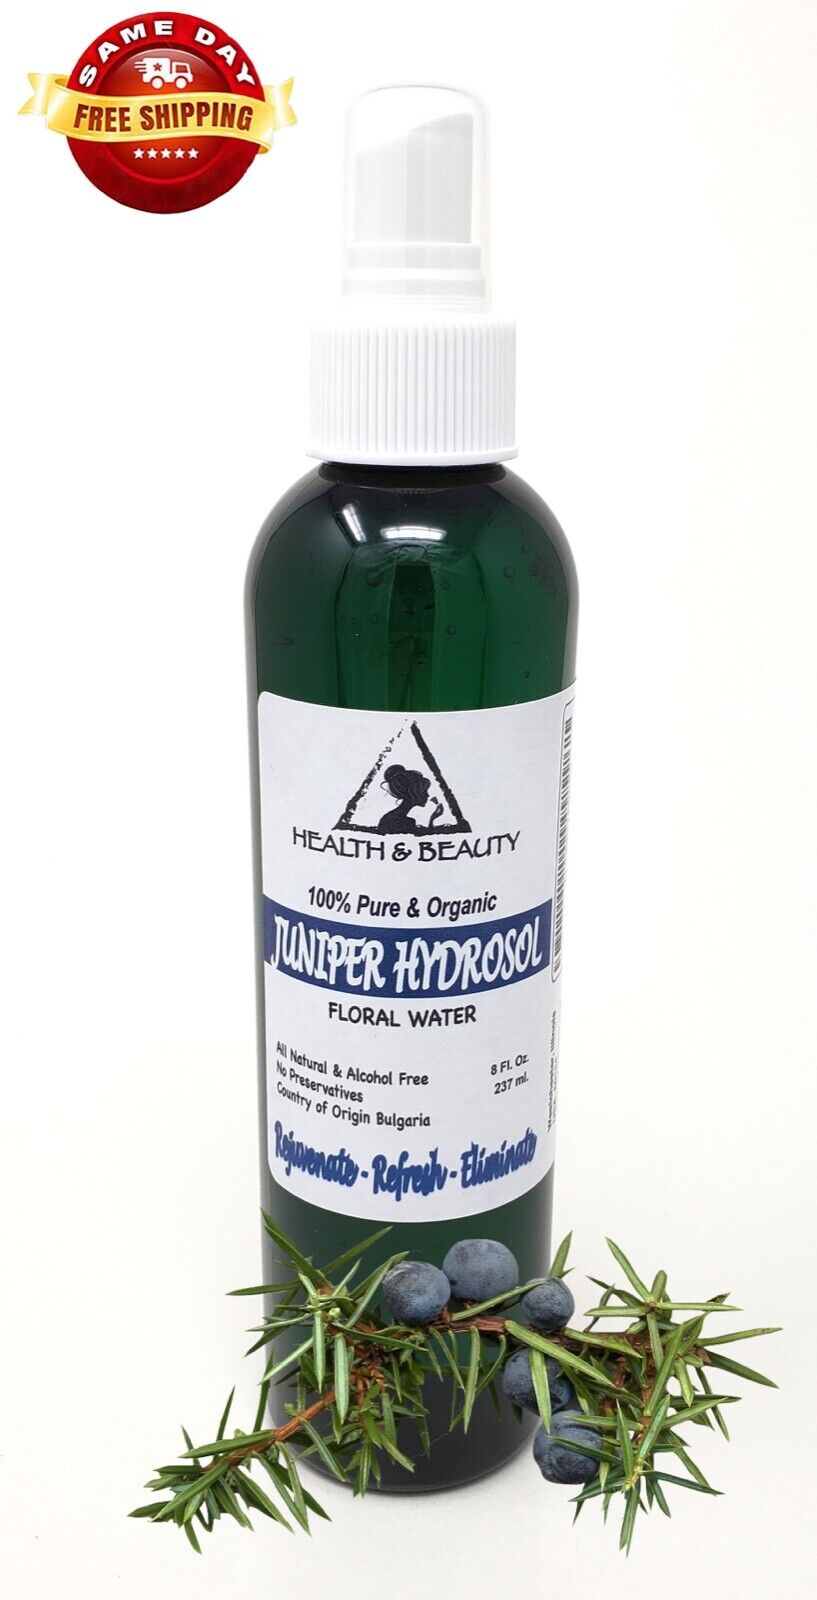 JUNIPER BERRY HYDROSOL ORGANIC FLORAL NATURAL BO security Fees free WATER 100% PURE